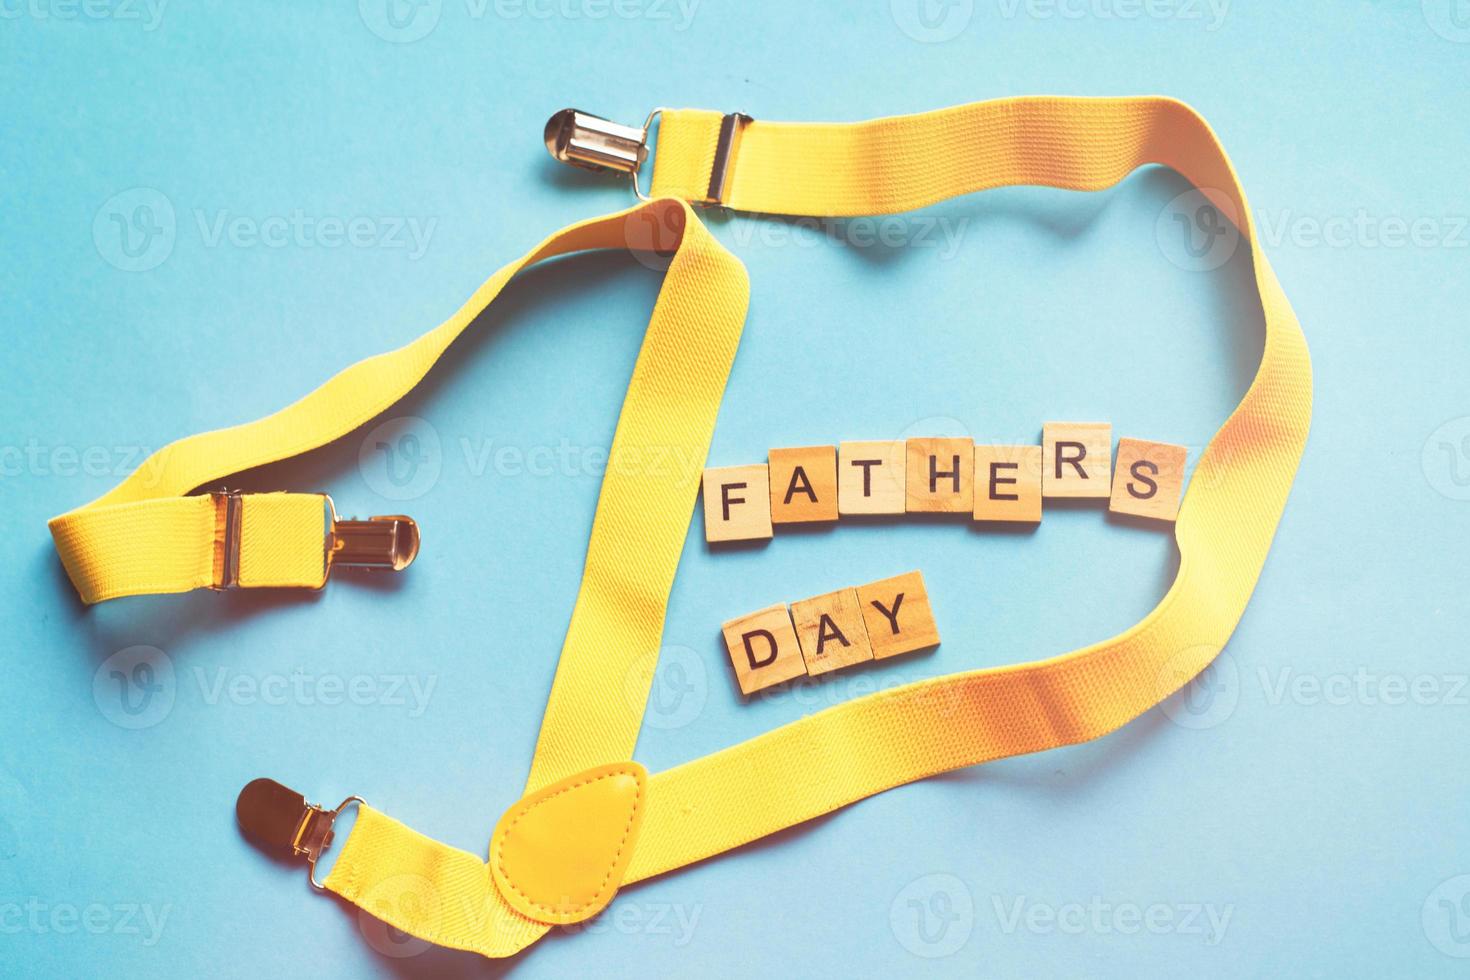 happy father's day lettering made by wooden cubes on a blue background with a yellow suspenders photo